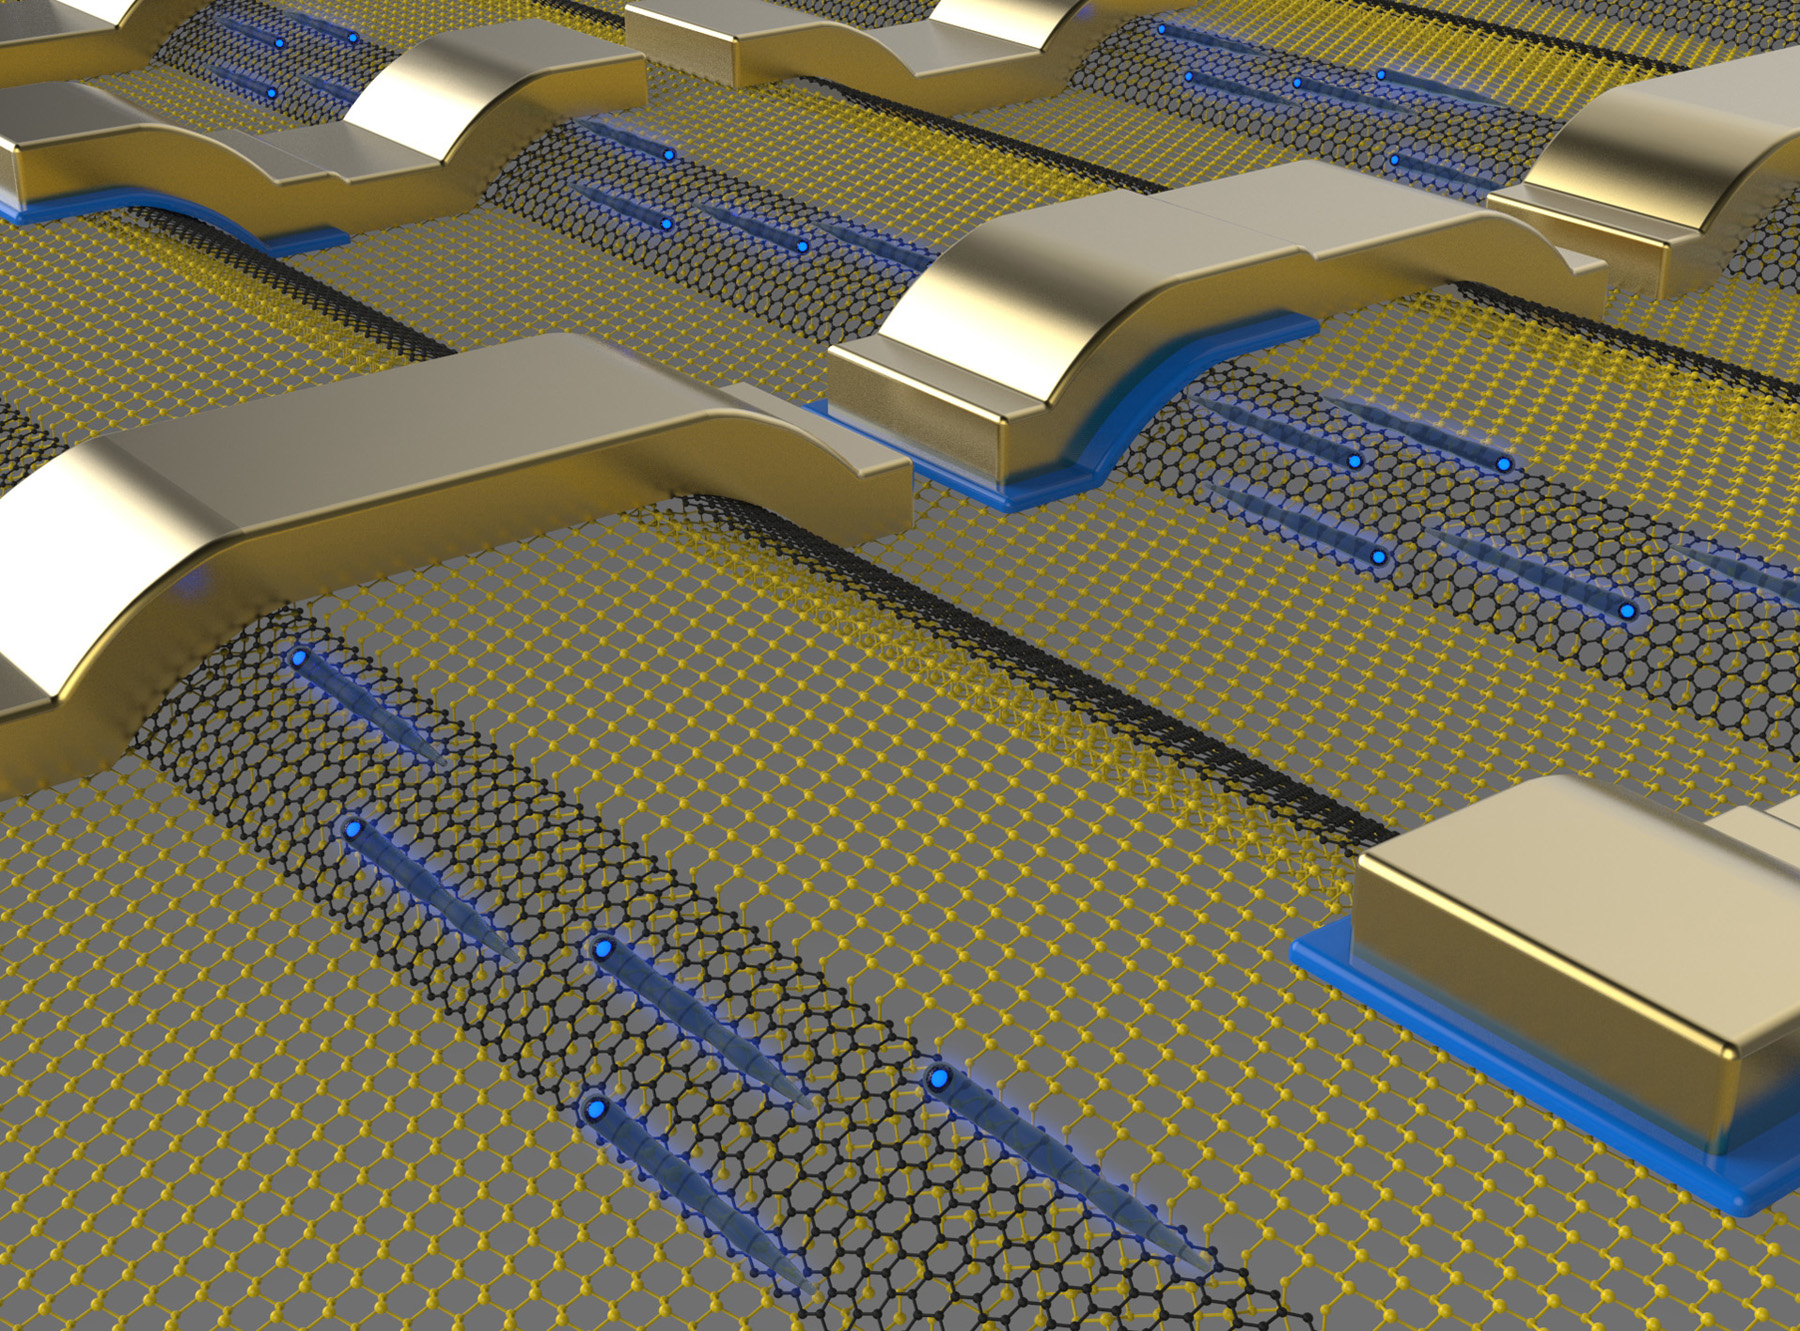 Conceptual drawing of an electronic circuit comprised of interconnected graphene nanoribbons (black atoms) that are epitaxially grown on steps etched in silicon carbide (yellow atoms).  Electrons (blue) travel ballistically along the ribbon and then from one ribbon to the next via the metal contacts. Electron flow is modulated by electrostatic gates. (Image courtesy of John Hankinson)